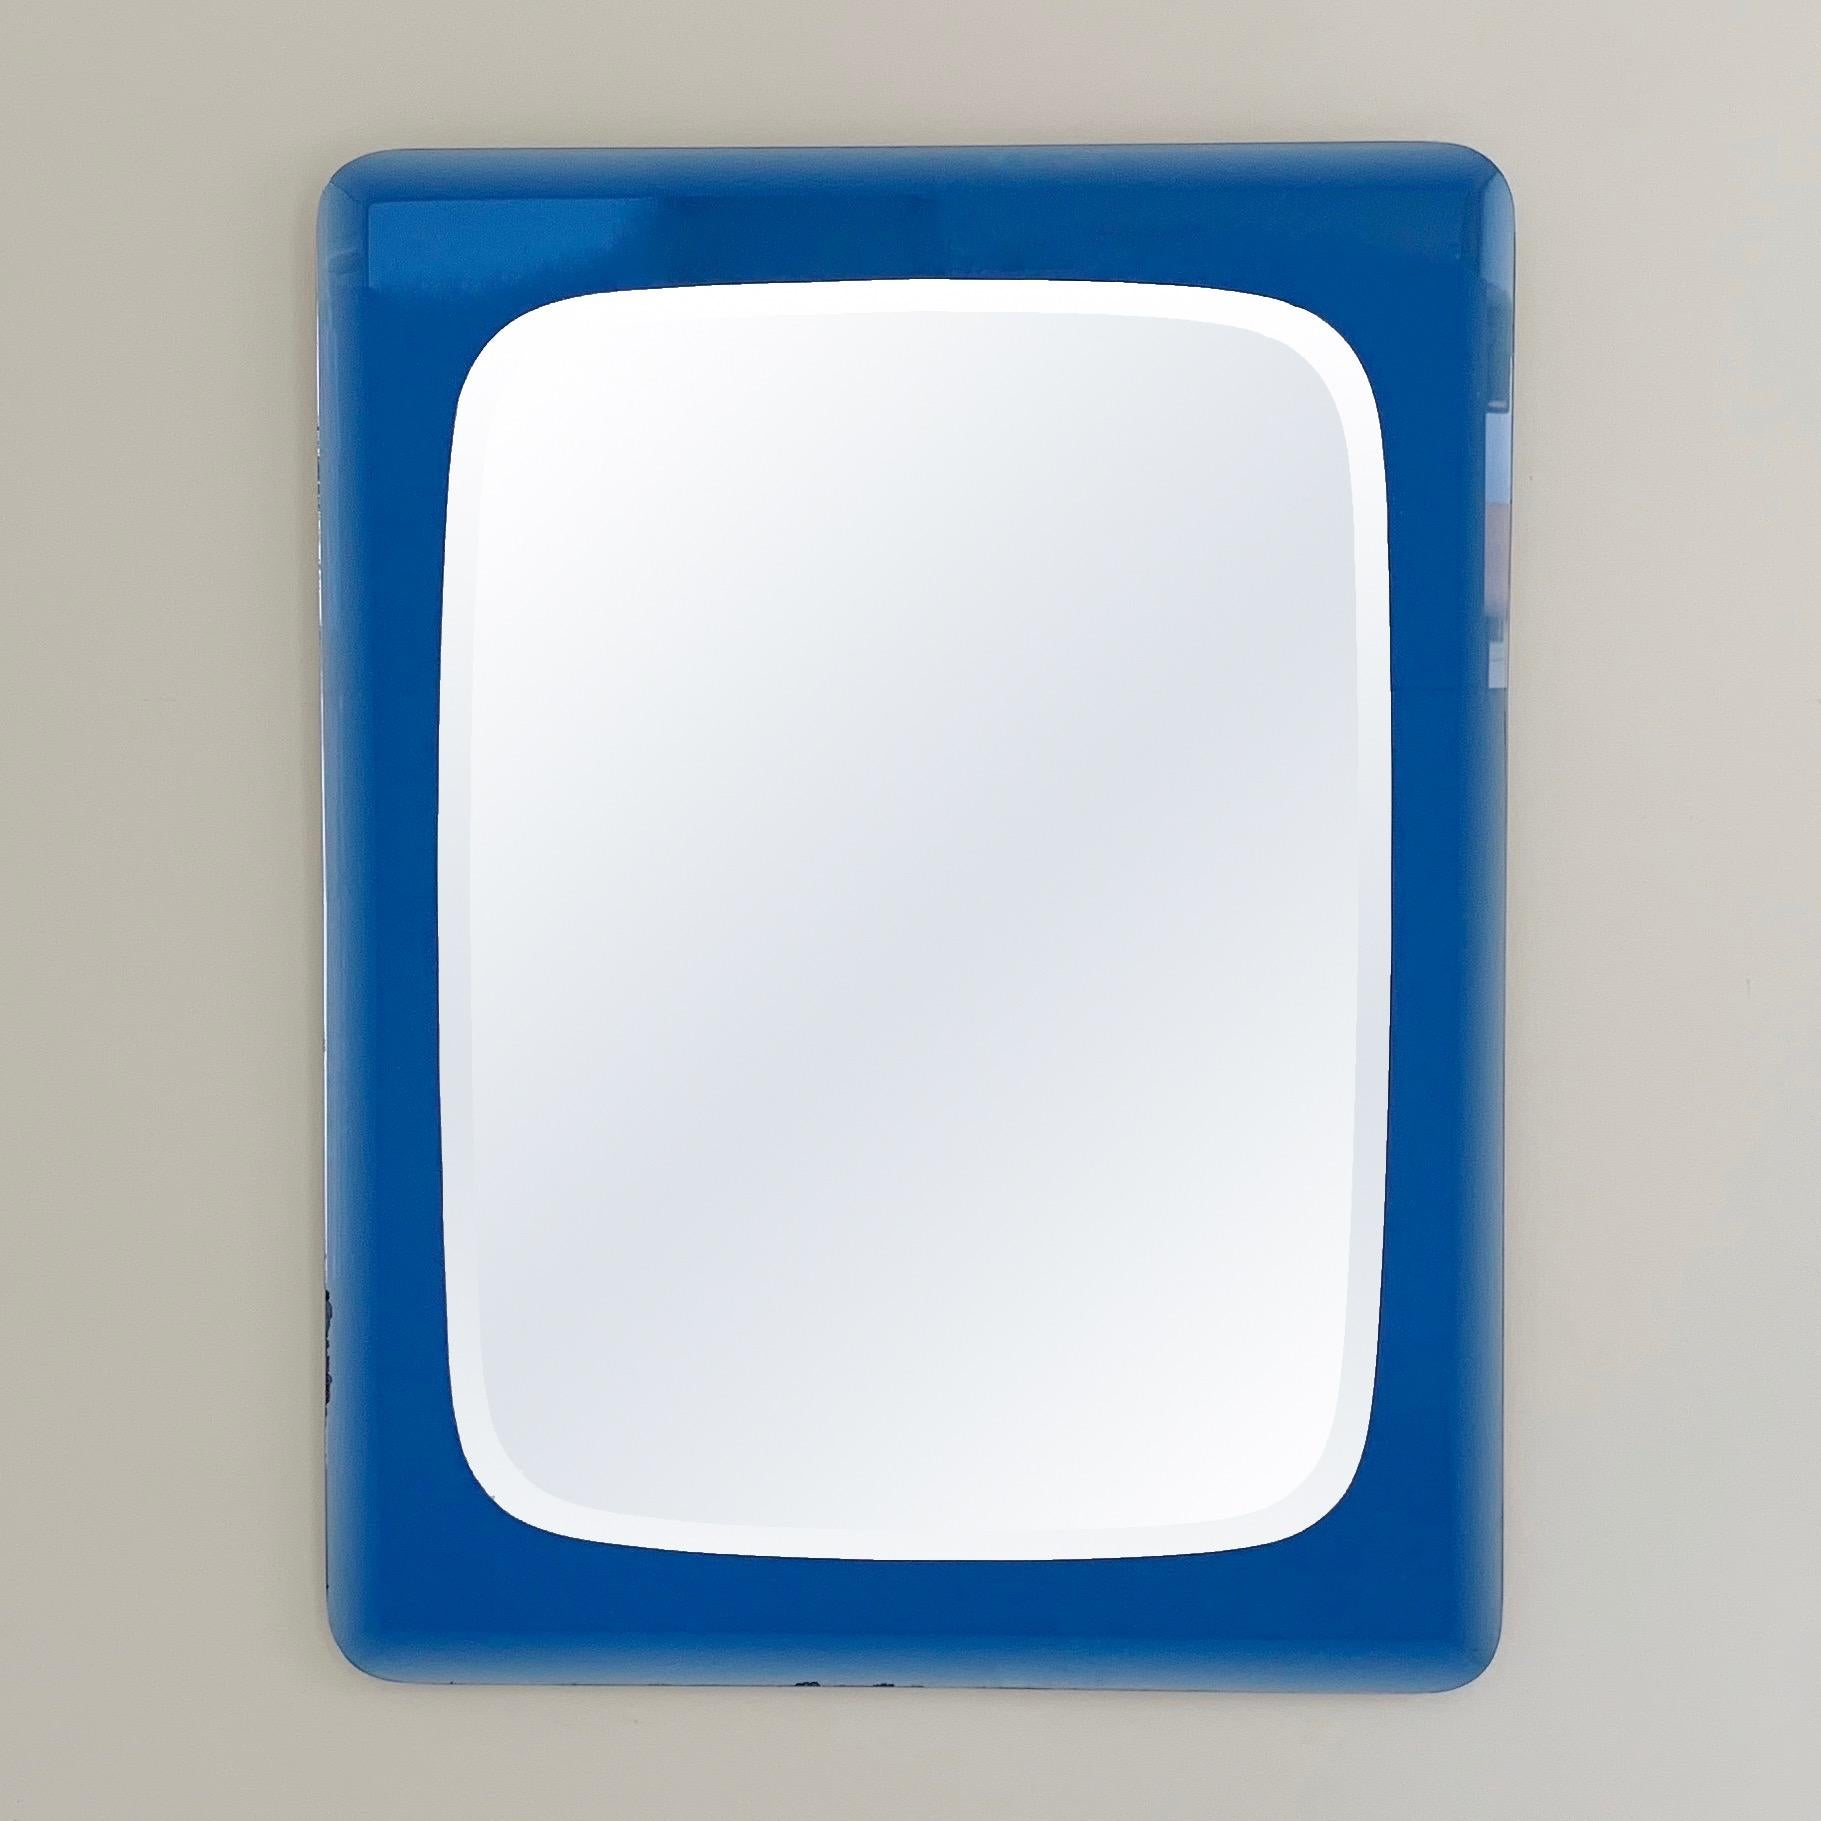 Beautiful midcentury wall mirror by Cristal Arte, circa 1960, Italy.
Double-level: cobalt blue mirrored and beveled glass frame, beveled mirror.
Dimensions: 70 cm W, 90 cm H, 3 cm D.
Rare model on the market, with a nice original vintage